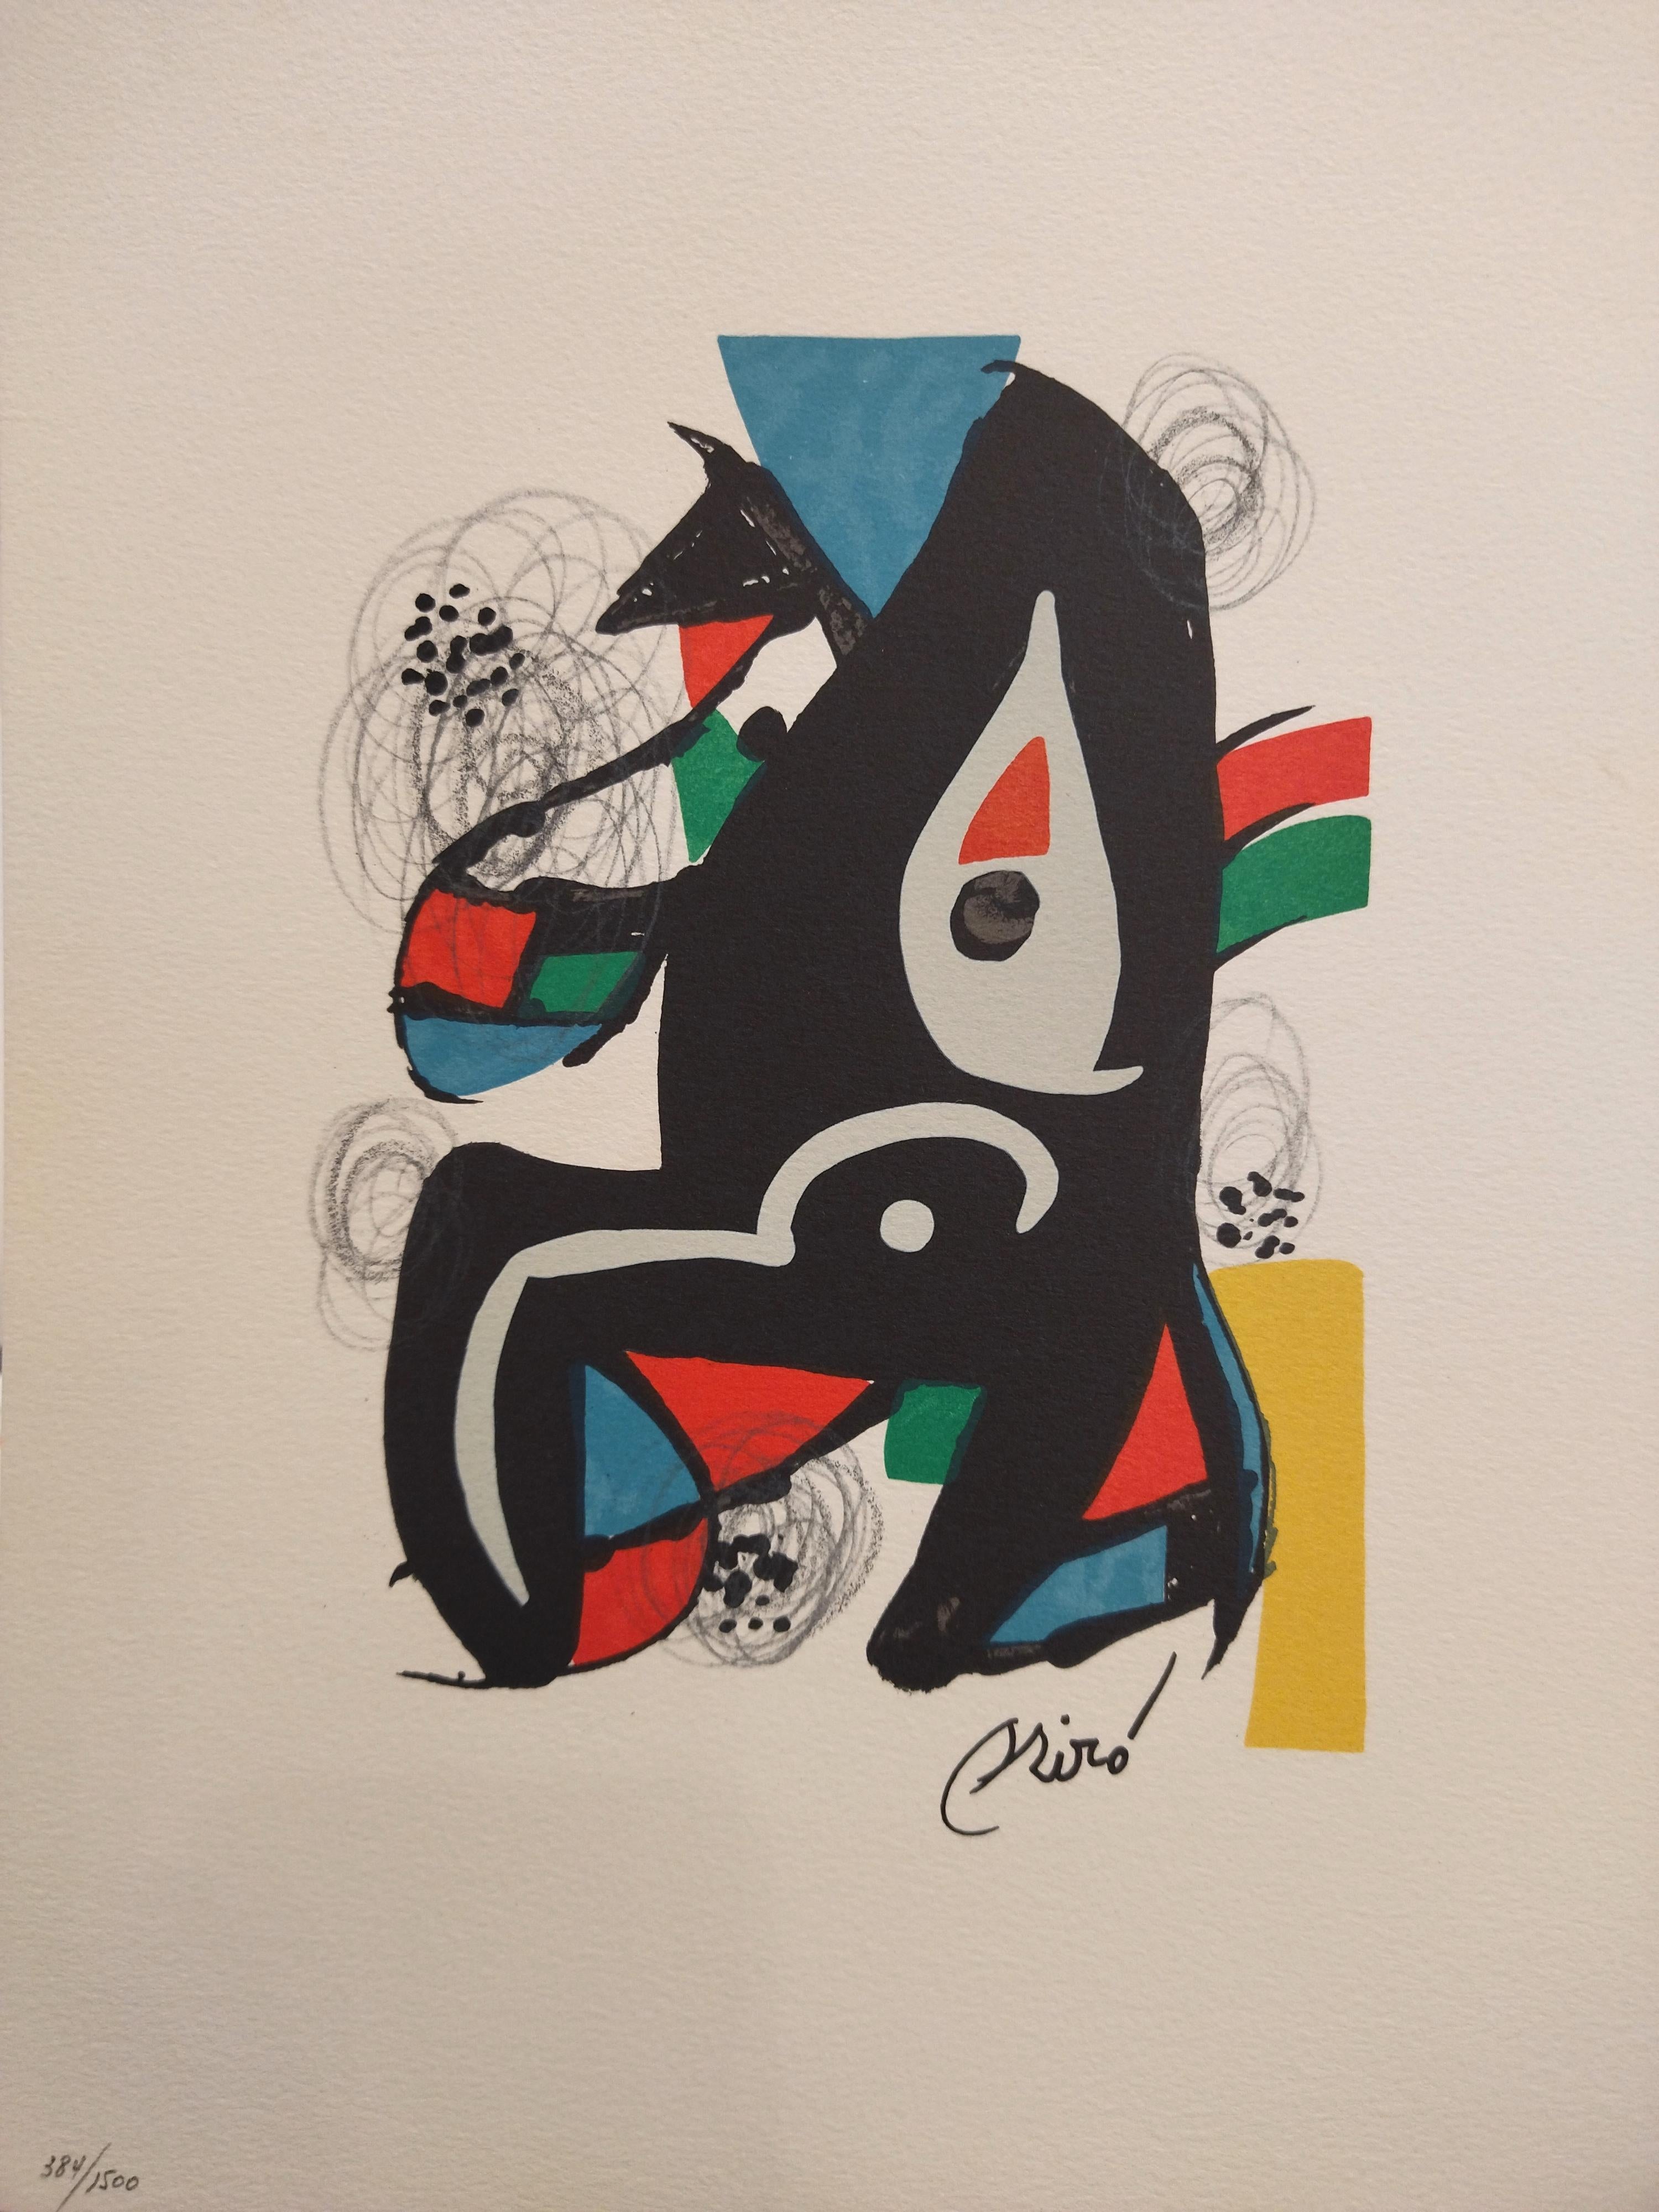 Joan Miró Abstract Print - Miro    Little La melodie acide. original lithograph painting. 